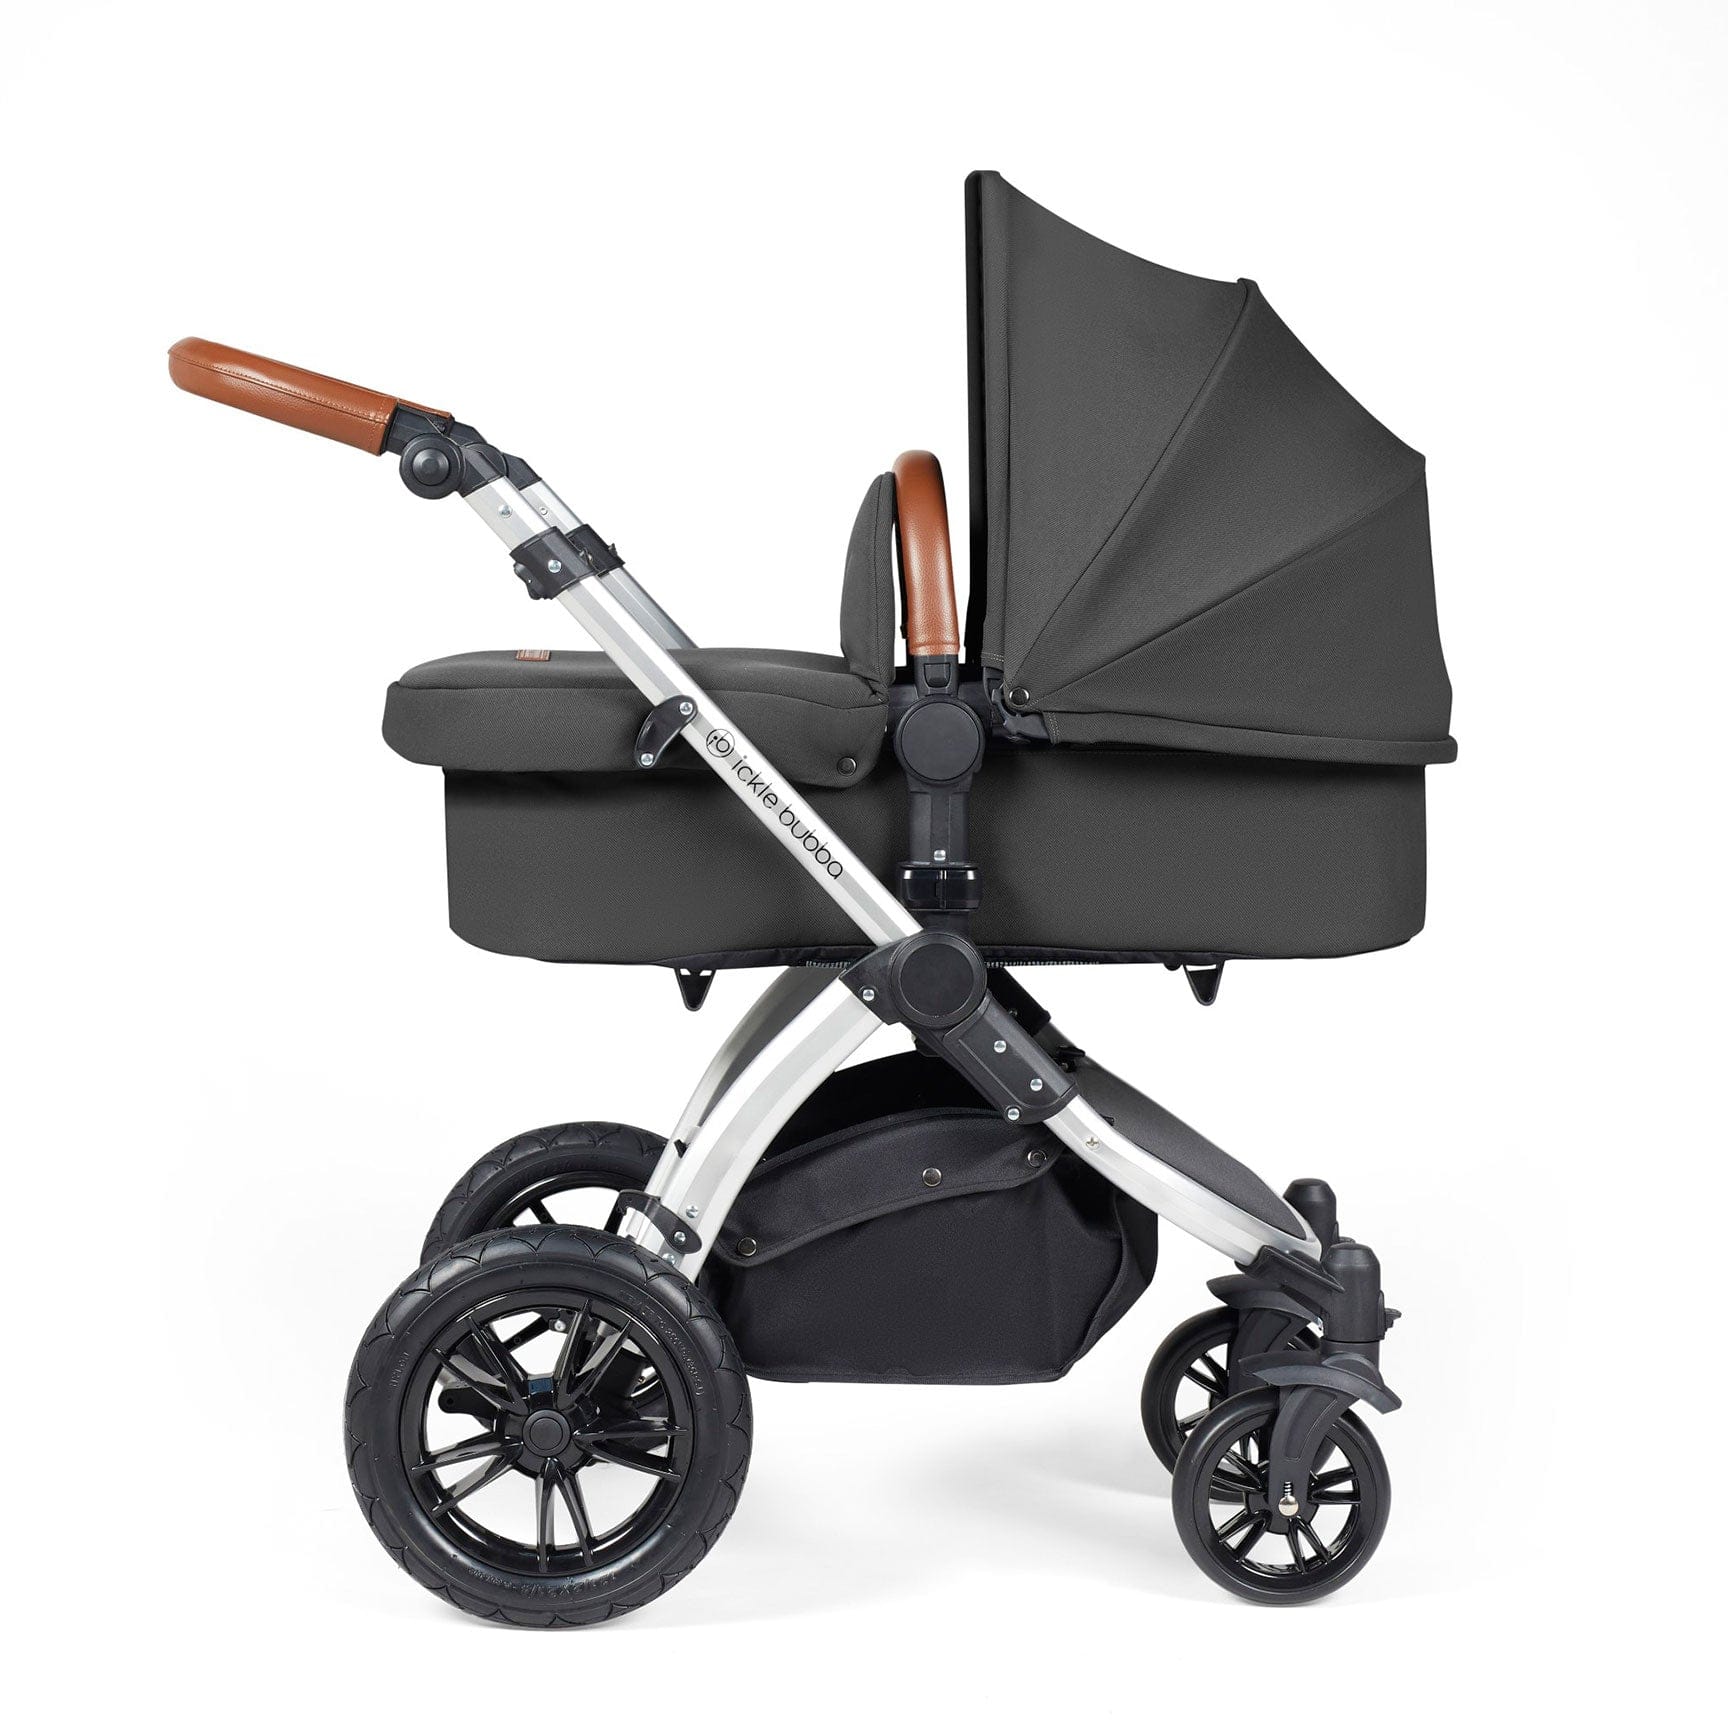 Ickle Bubba Stomp Luxe All-in-One Travel System with Isofix Base in Silver/Charcoal Grey/Tan Travel Systems 10-011-300-255 5056515026542